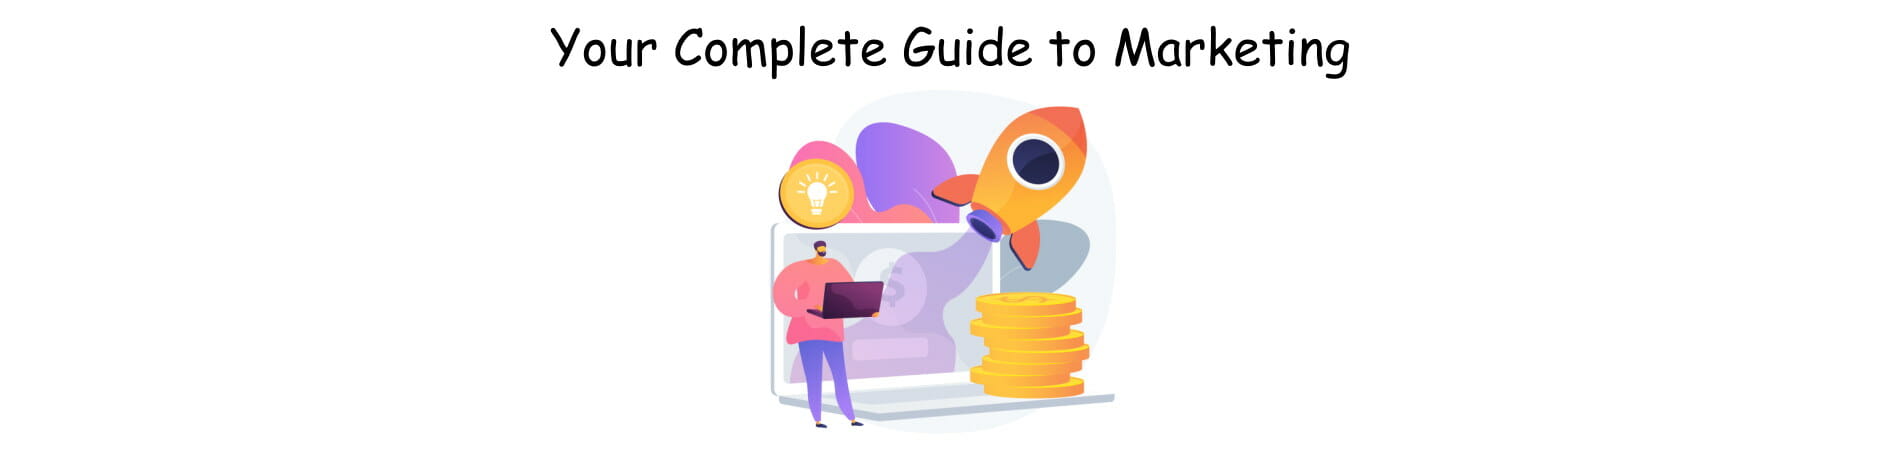 A complete guide to marketing your business